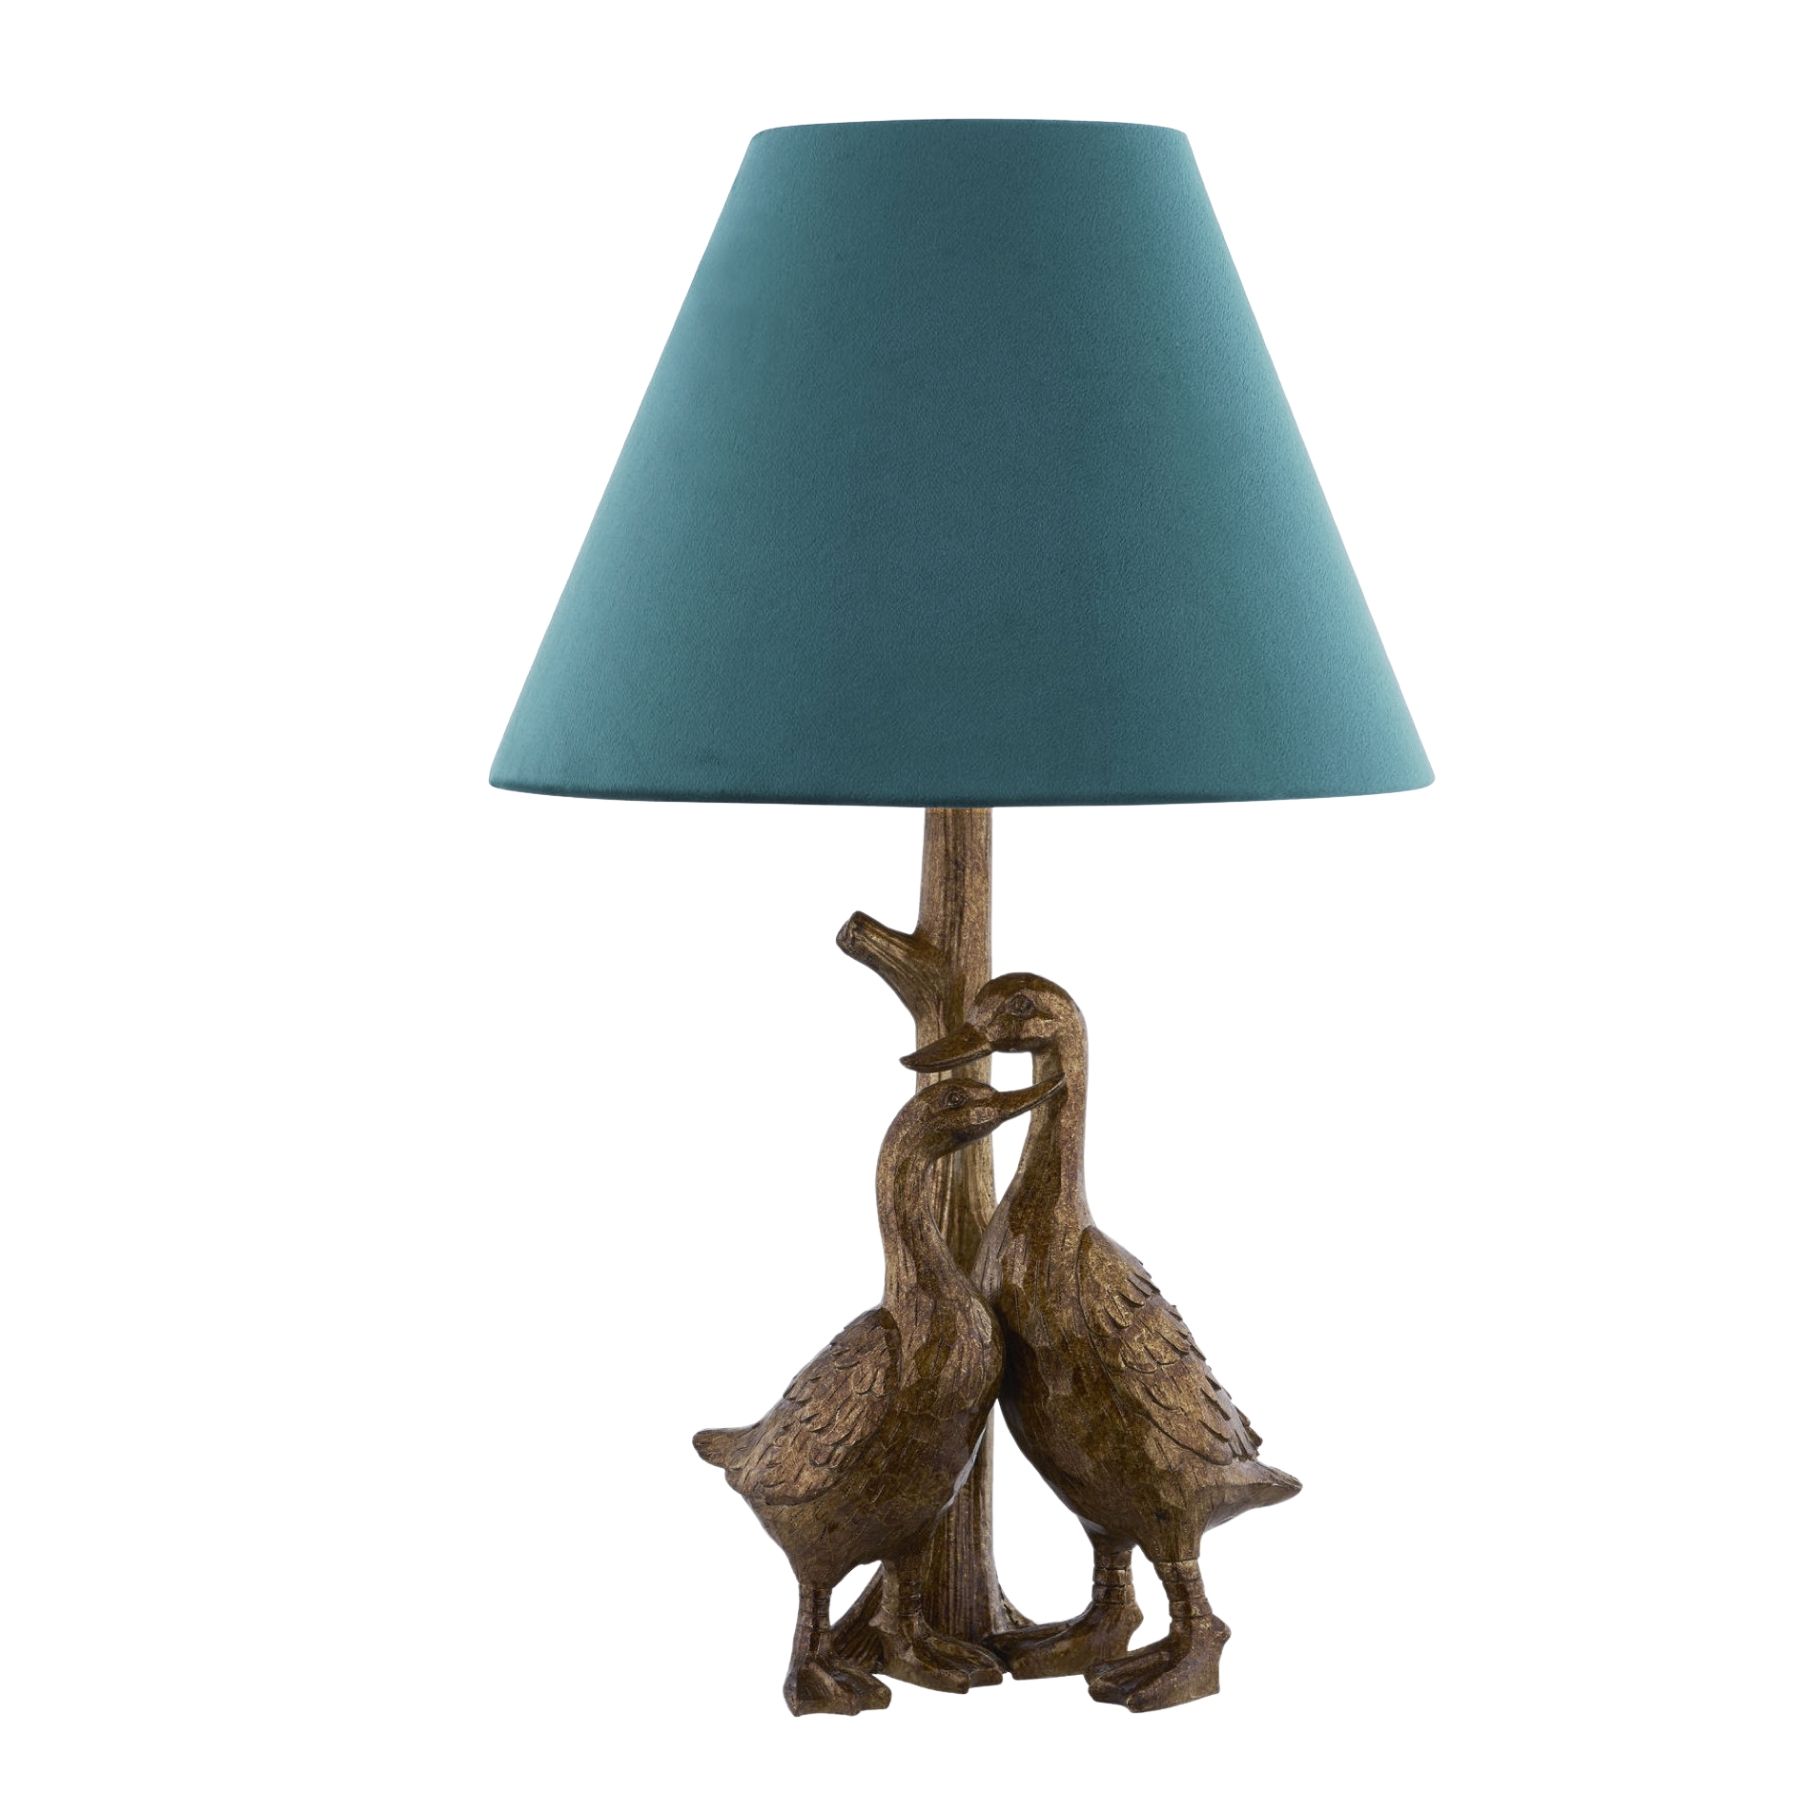 Gold Pair Of Ducks Table Lamps With Velvet Shade - Image 1